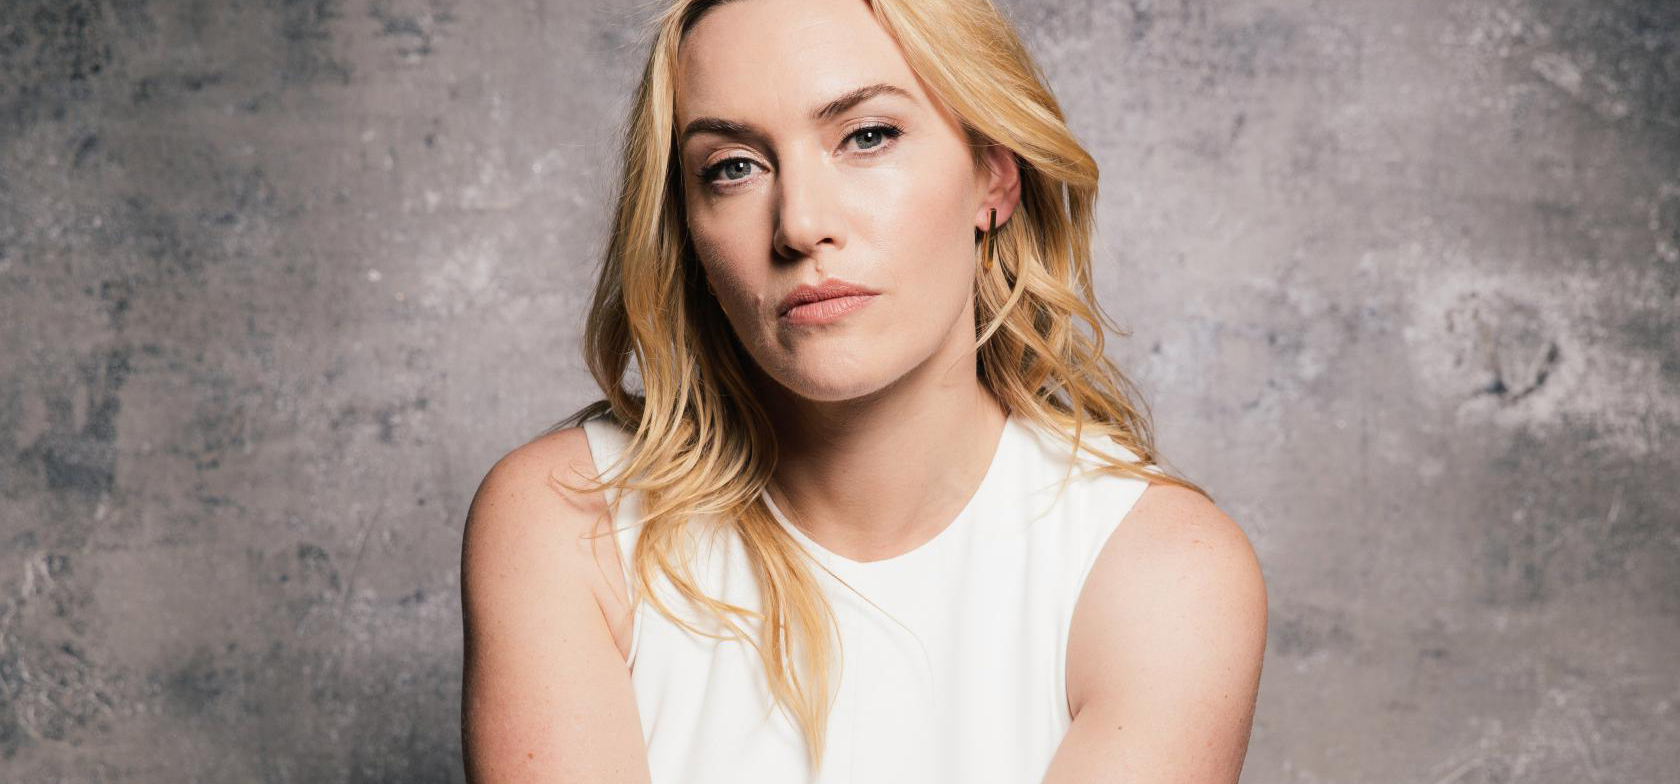 kate winslet contra photoshop